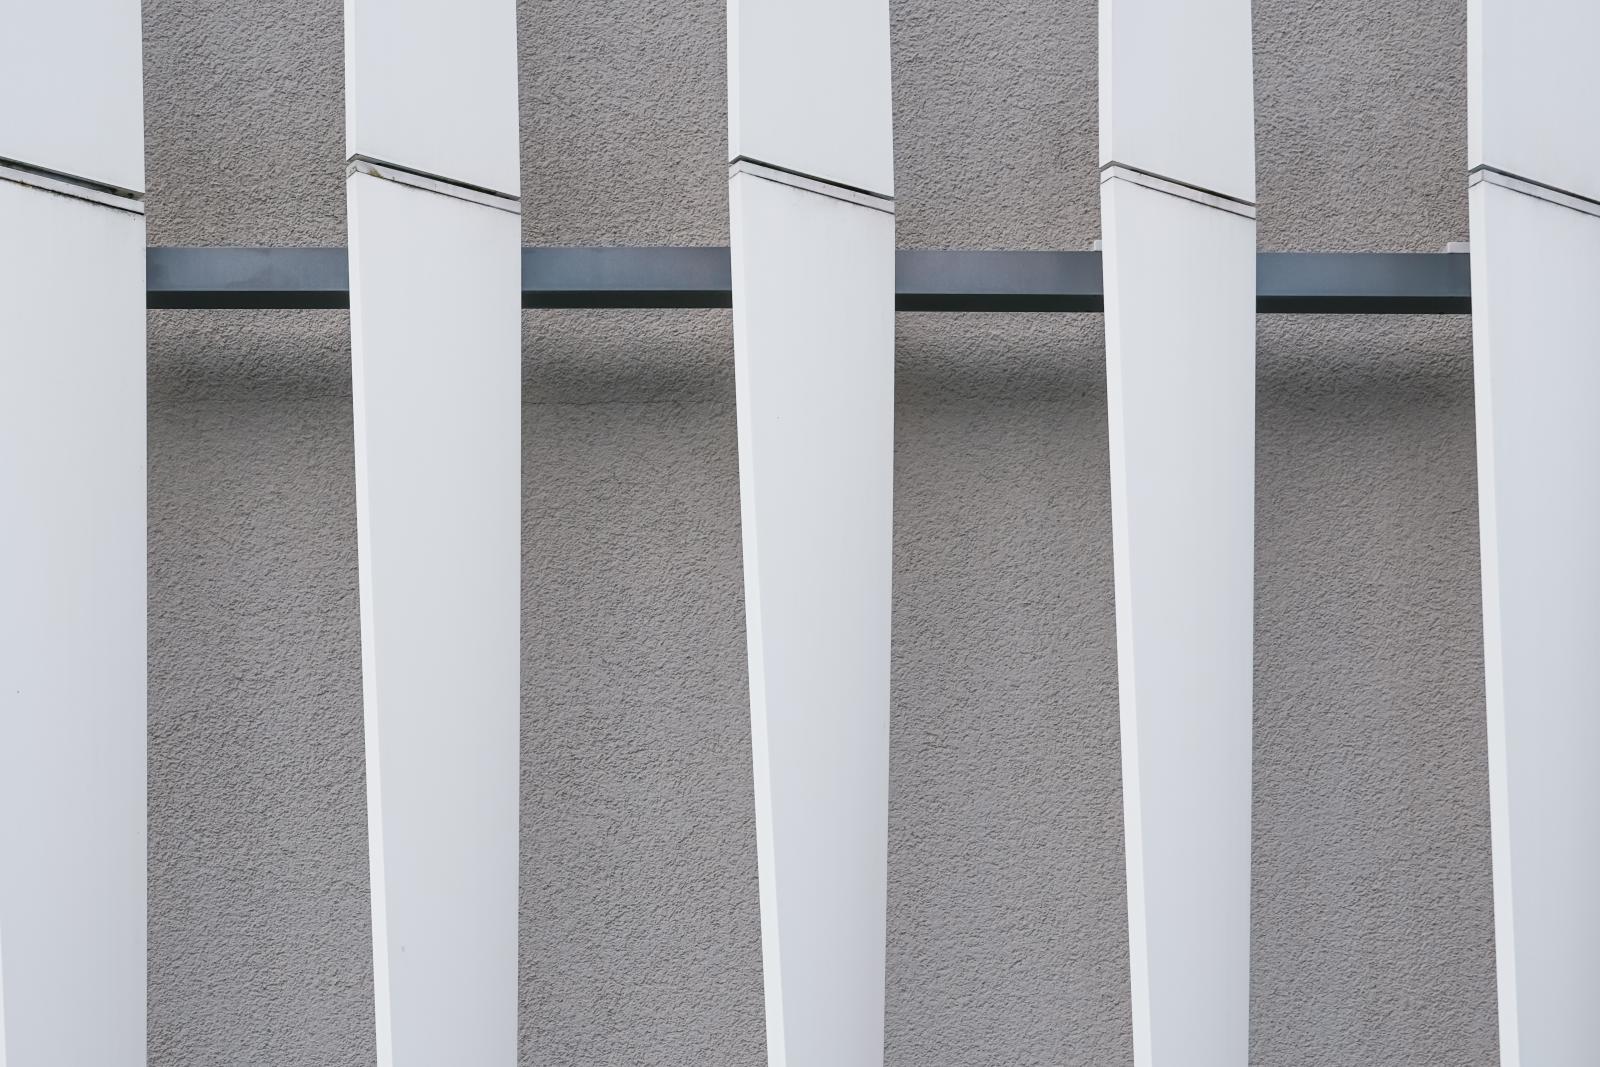 Image from New Photographs -  Ulm, Germany  # 4137 1/2024 Linear Textures: Rhythmic...